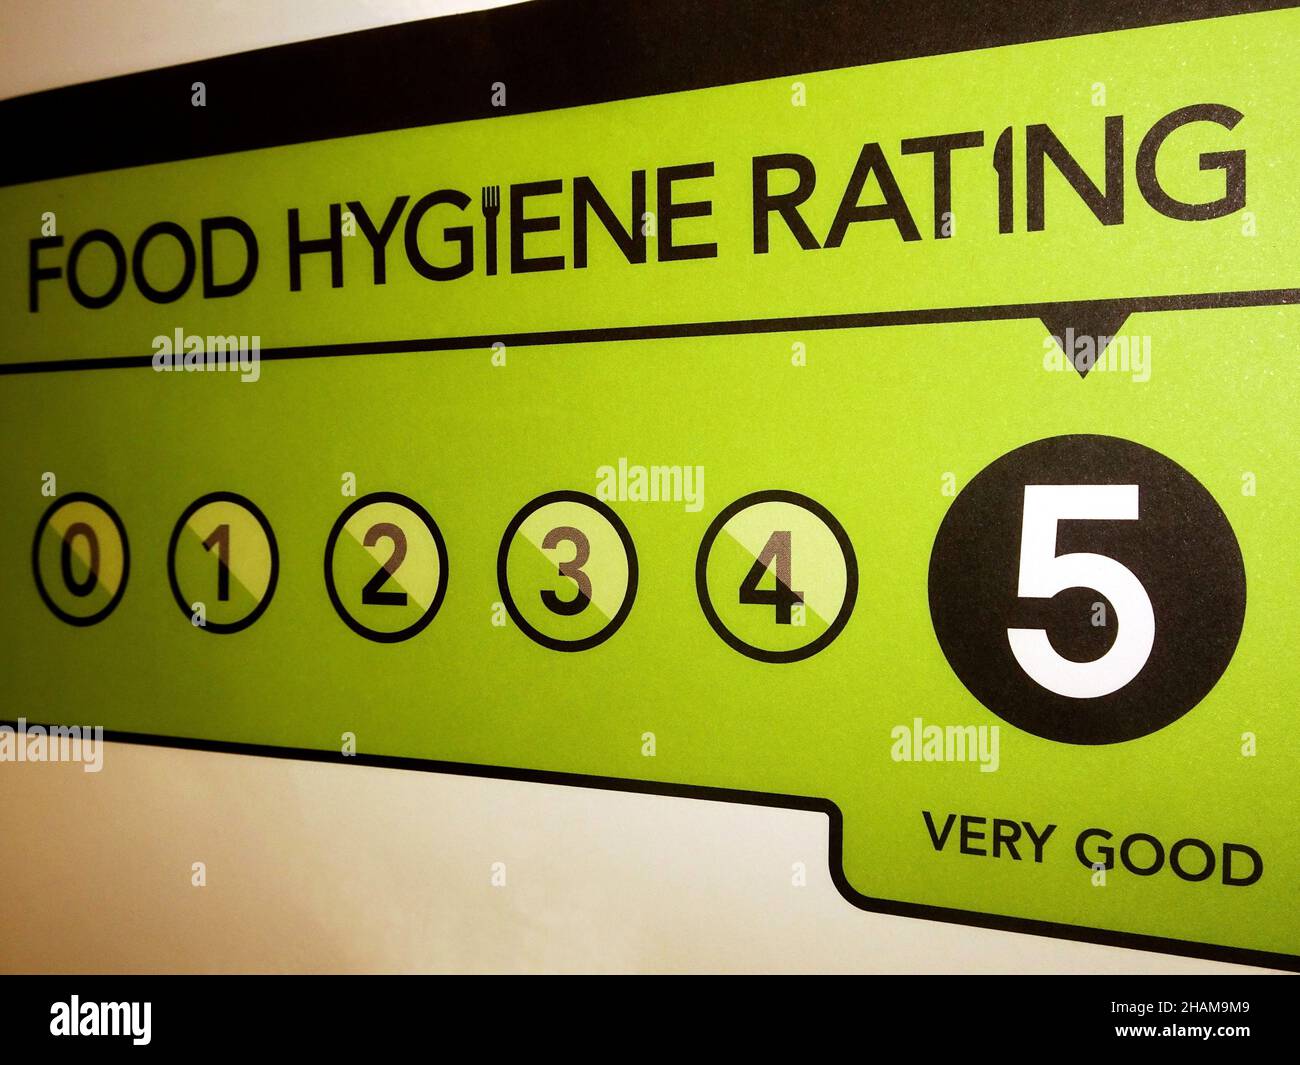 VERY GOOD food hygiene rating from the United Kingdom Food Standards Agency Stock Photo